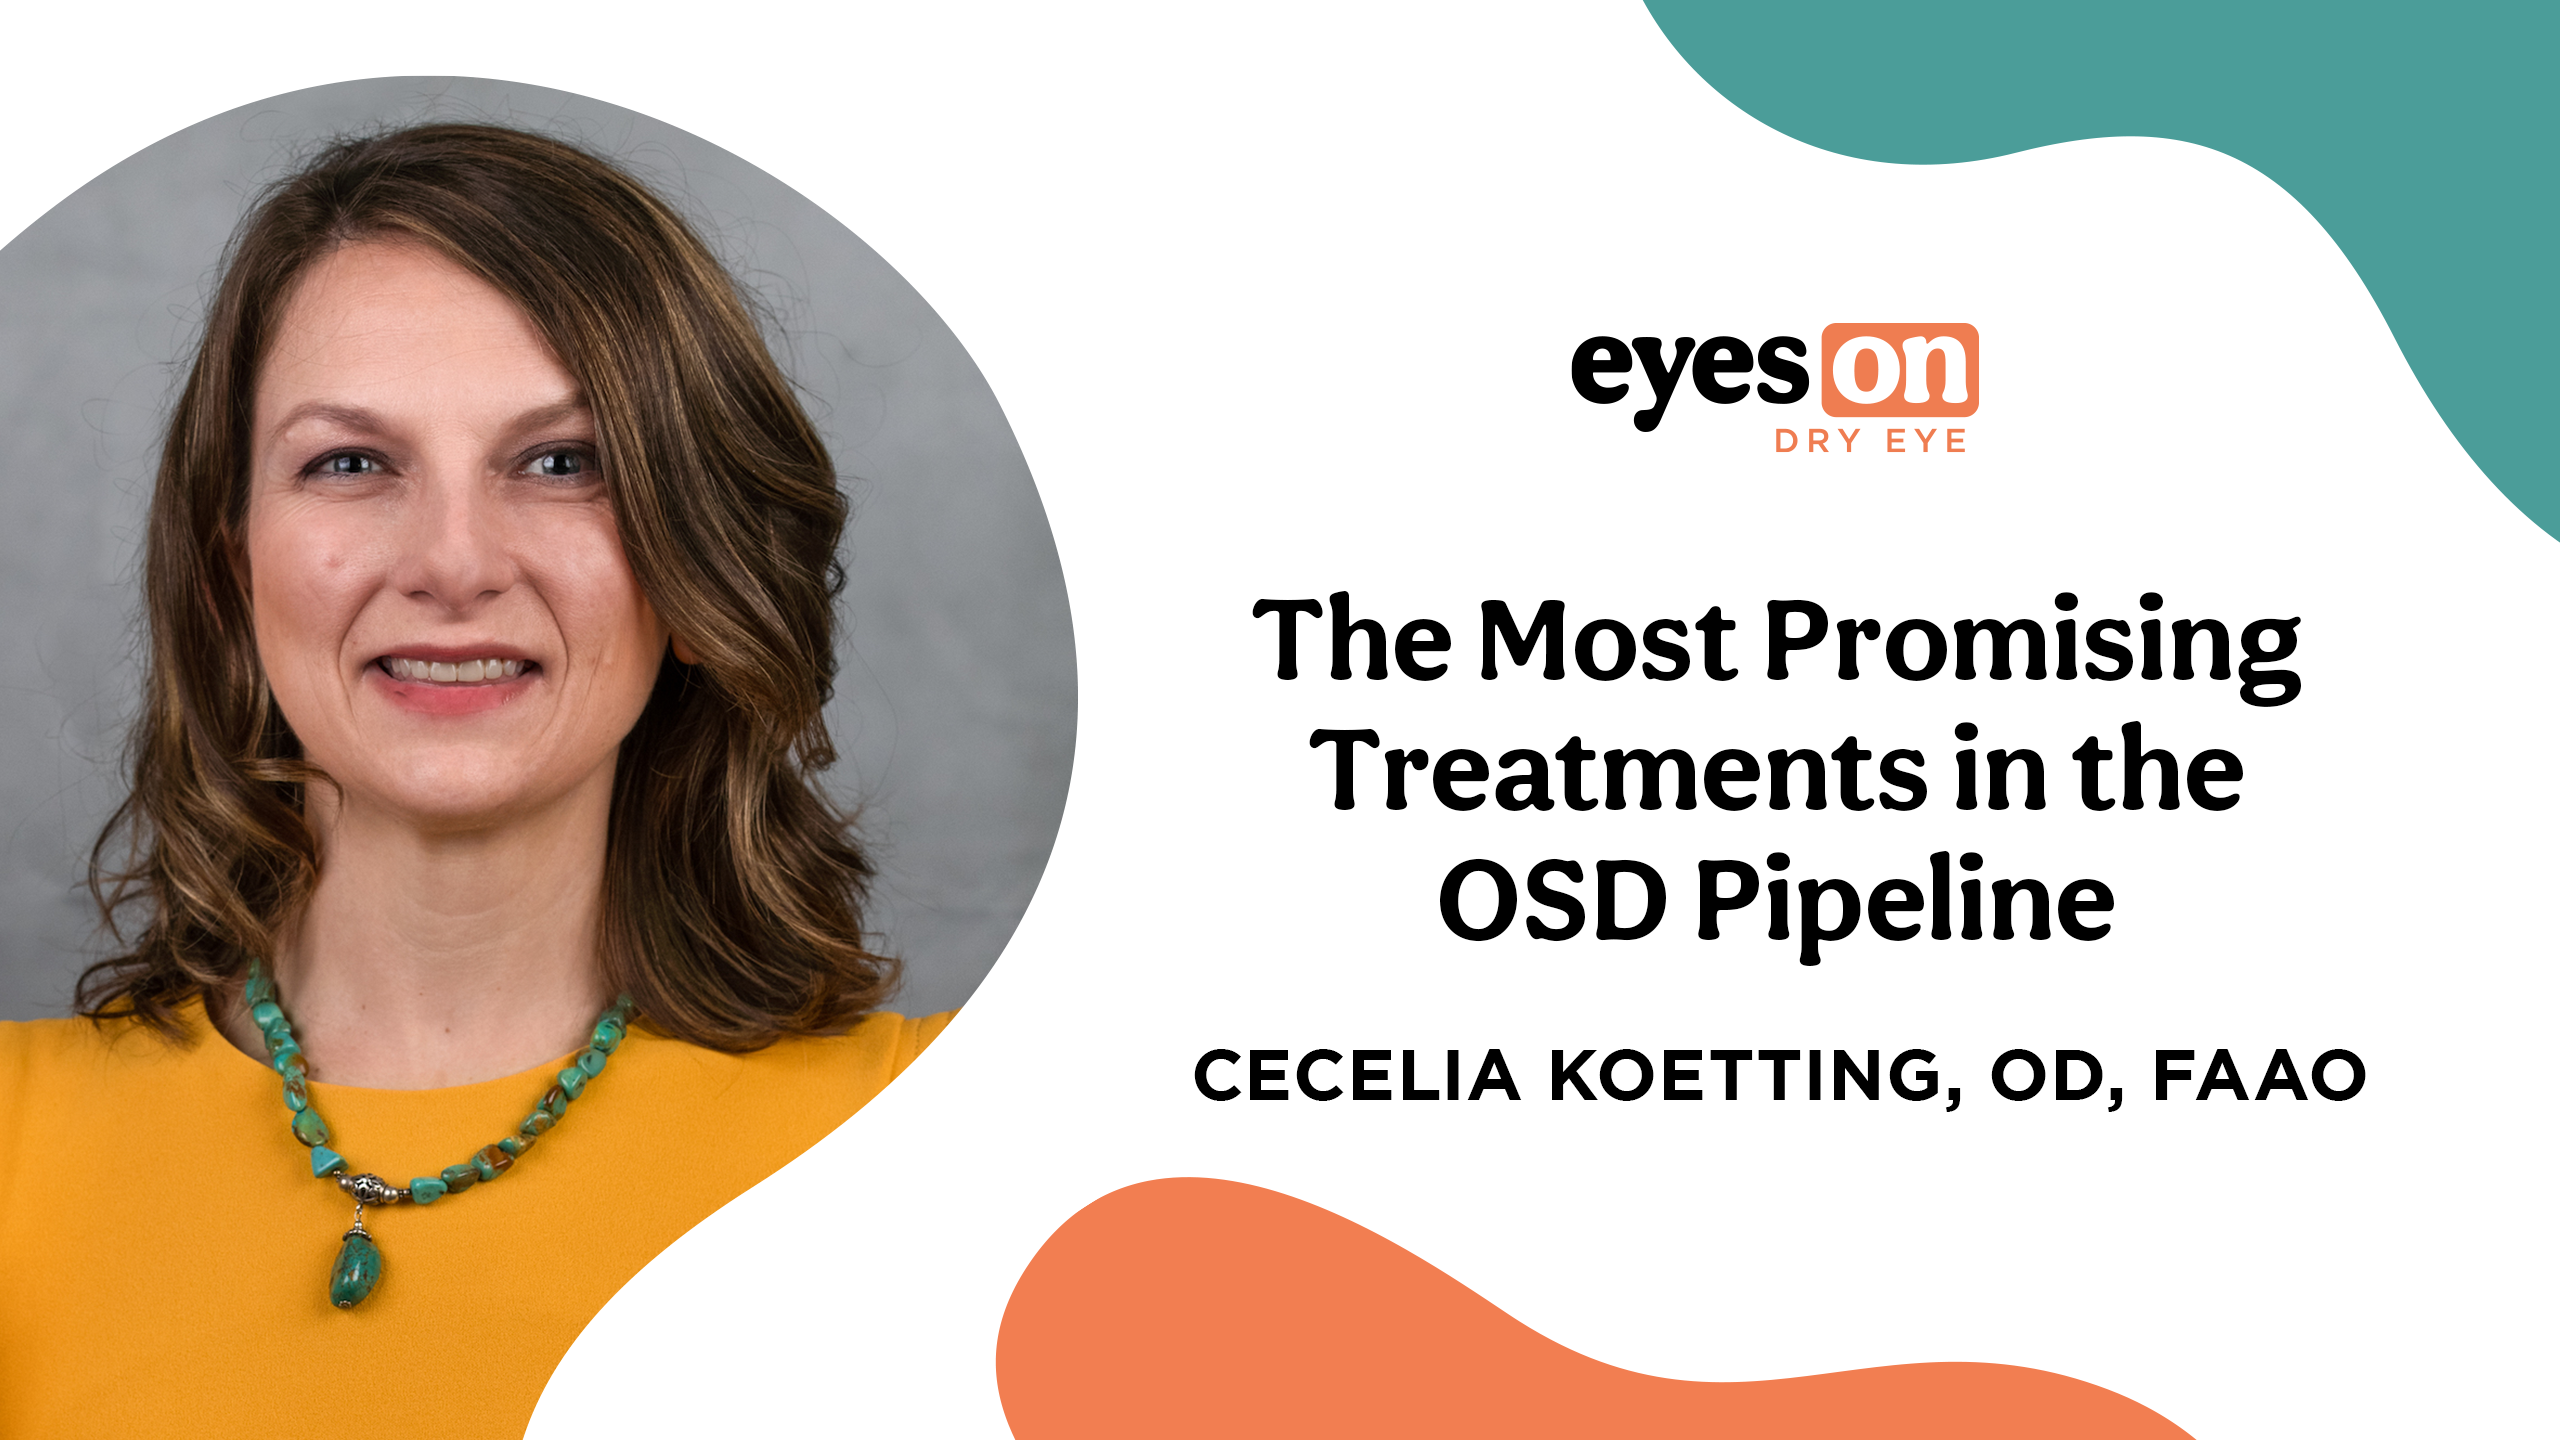 The Most Promising Treatments in the OSD Pipeline